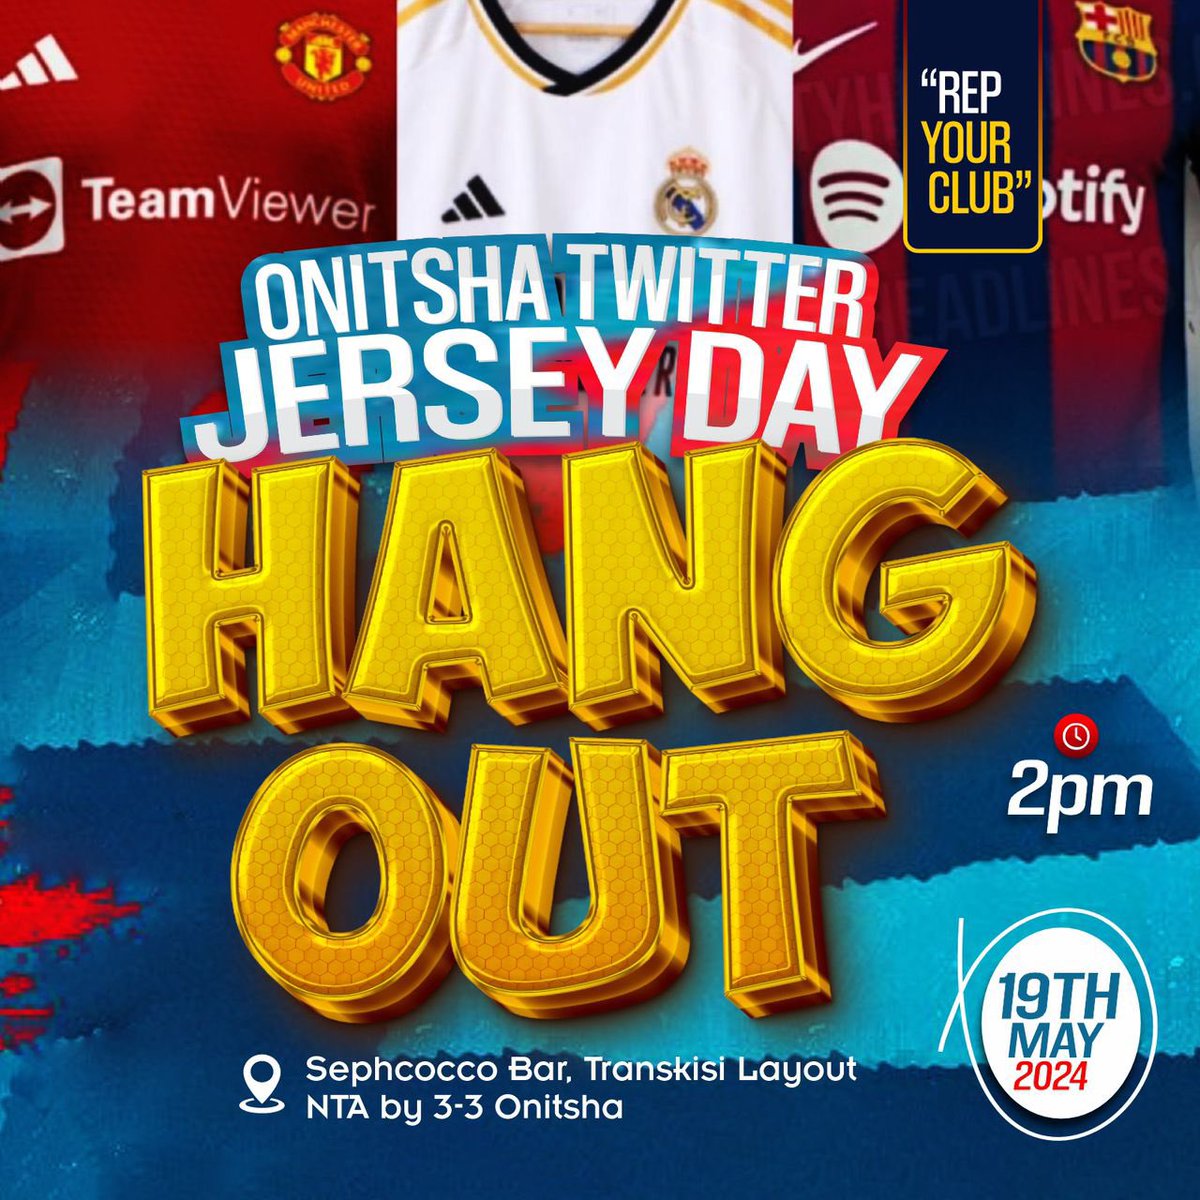 I’m not asking for much oo, someone should buy this for me from @Donmekusy2j 🙏🙏 i need to rock it at the upcoming #OnitshaTwitterJerseyHangout on 19th may 🤭 Be there #OnitshaTwitterCommunity #RepYourFootballClub @chude__ @chudy_jnr @Chisommark @anambra_diaries